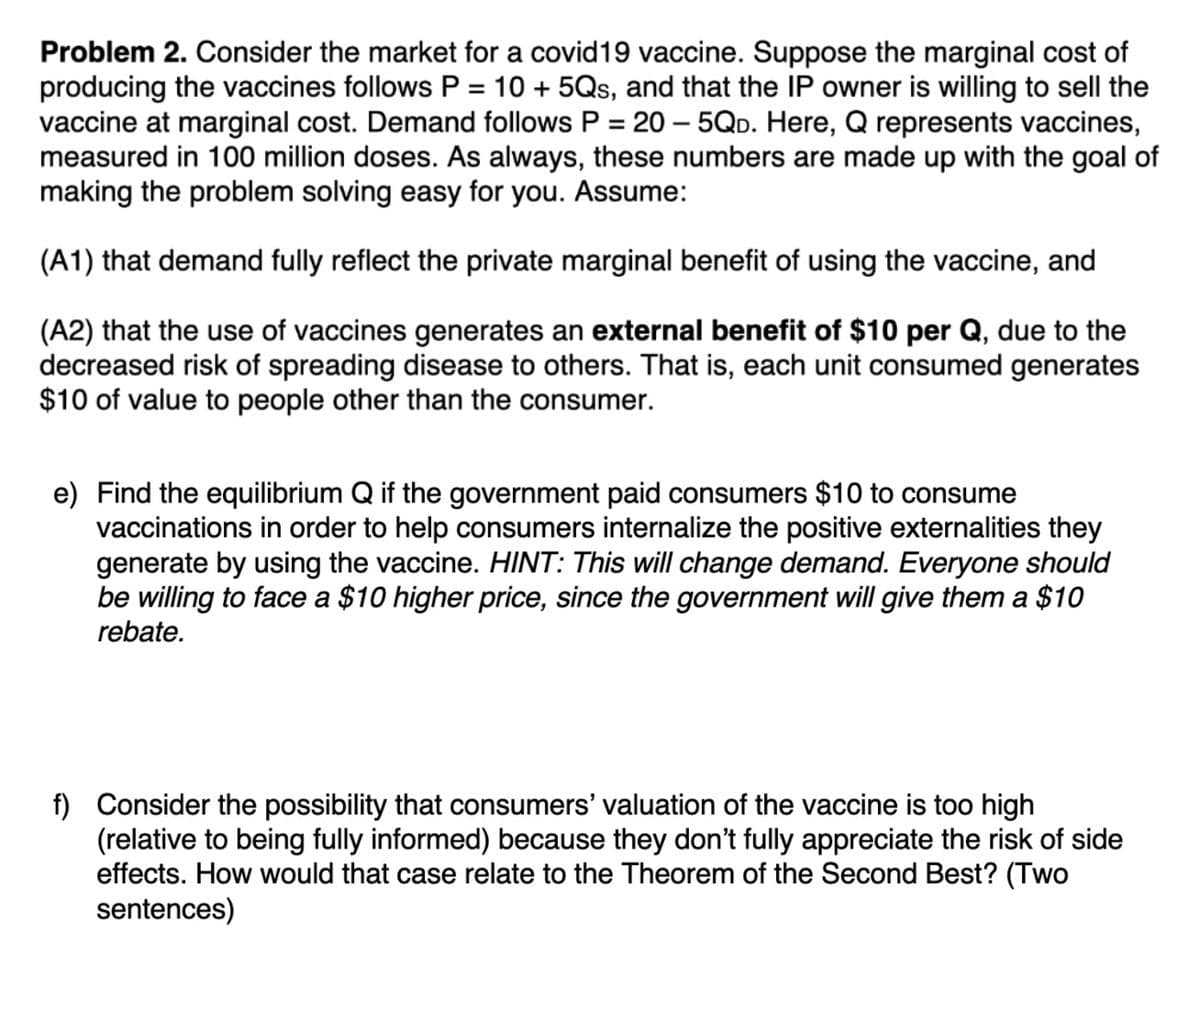 Problem 2. Consider the market for a covid19 vaccine. Suppose the marginal cost of
producing the vaccines follows P = 10 + 5Qs, and that the IP owner is willing to sell the
vaccine at marginal cost. Demand follows P = 20 – 5Qp. Here, Q represents vaccines,
measured in 100 million doses. As always, these numbers are made up with the goal of
making the problem solving easy for you. Assume:
%D
(A1) that demand fully reflect the private marginal benefit of using the vaccine, and
(A2) that the use of vaccines generates an external benefit of $10 per Q, due to the
decreased risk of spreading disease to others. That is, each unit consumed generates
$10 of value to people other than the consumer.
e) Find the equilibrium Q if the government paid consumers $10 to consume
vaccinations in order to help consumers internalize the positive externalities they
generate by using the vaccine. HINT: This will change demand. Everyone should
be willing to face a $10 higher price, since the government will give them a $10
rebate.
f) Consider the possibility that consumers' valuation of the vaccine is too high
(relative to being fully informed) because they don't fully appreciate the risk of side
effects. How would that case relate to the Theorem of the Second Best? (Two
sentences)
